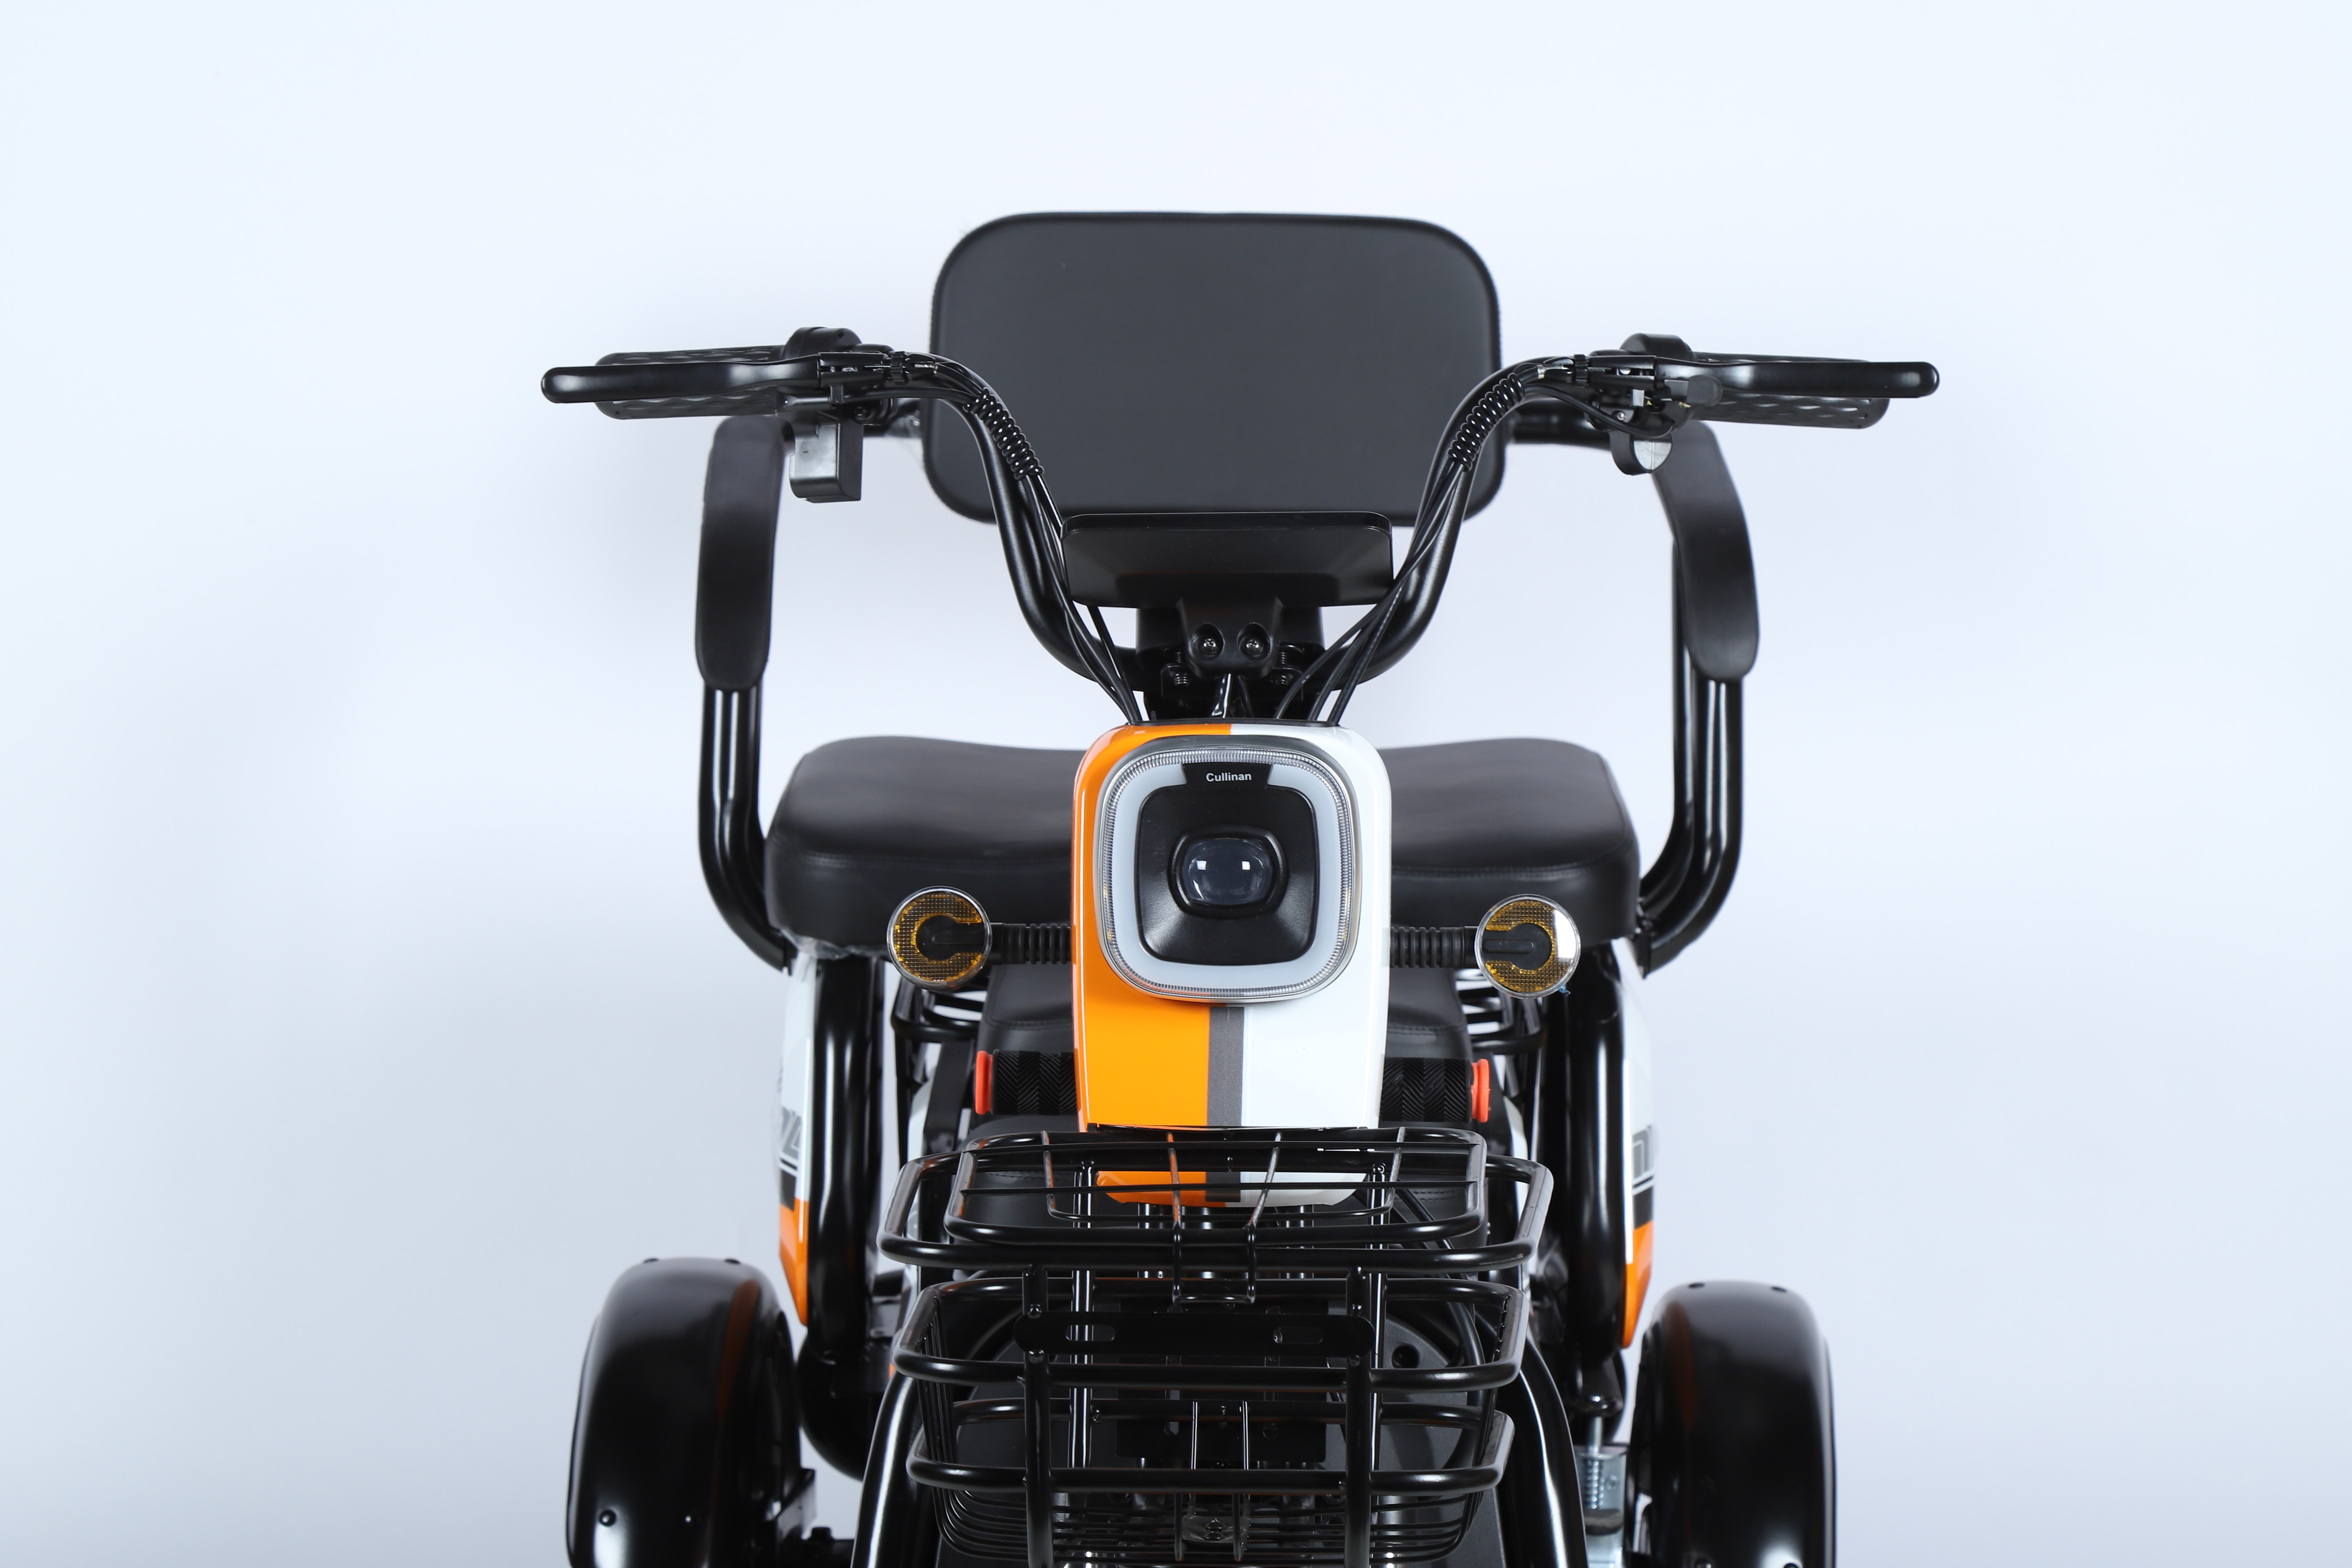 This 3,000W electric trike from China is a grandpa’s dream ride